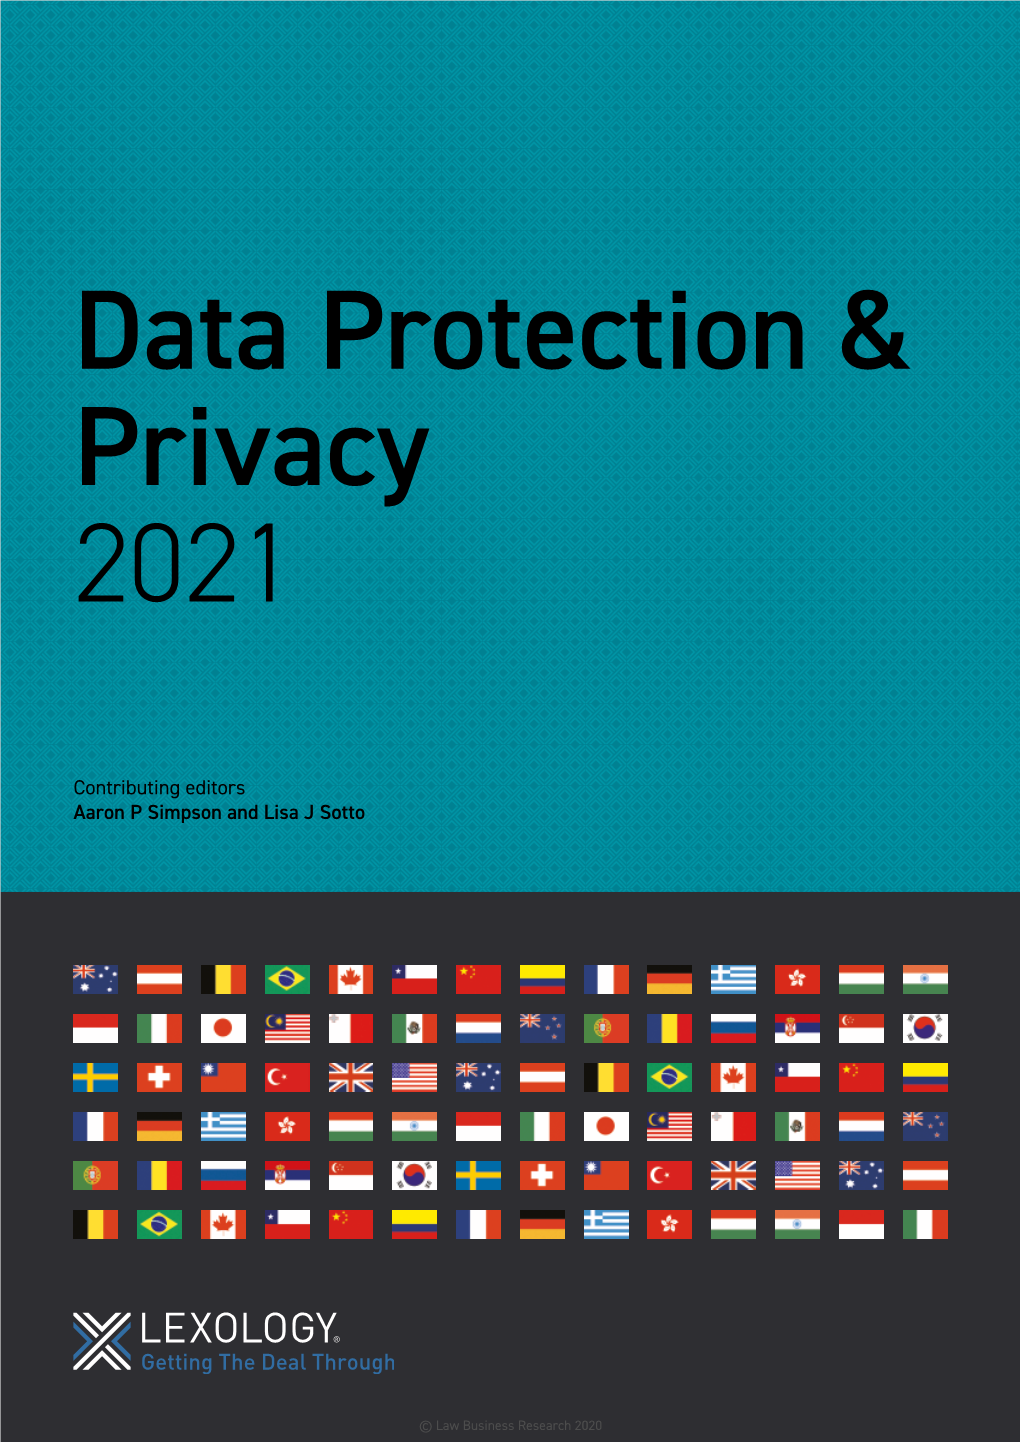 Data Protection & Privacy 2021